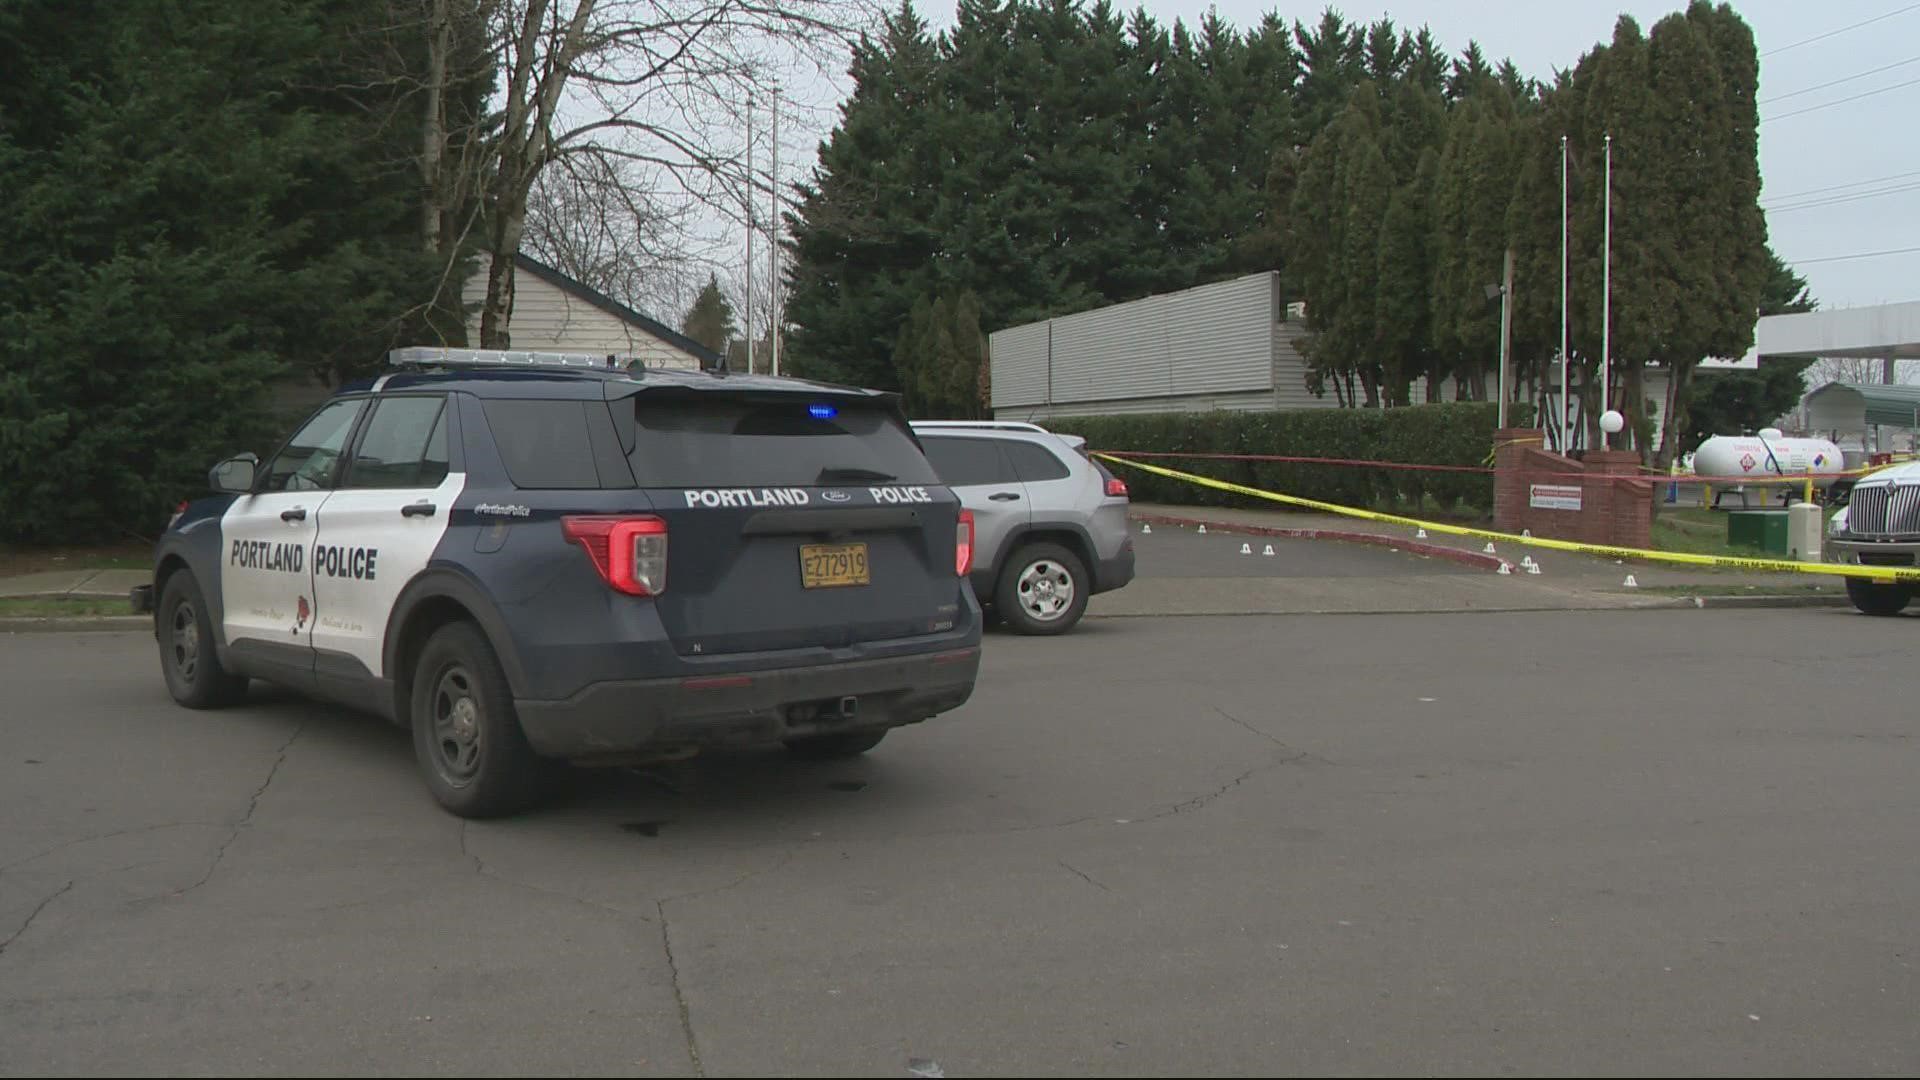 Two people died and a third was injured in a shooting early New Year's Day in the Argay Terrace neighborhood of Northeast Portland, according to police.